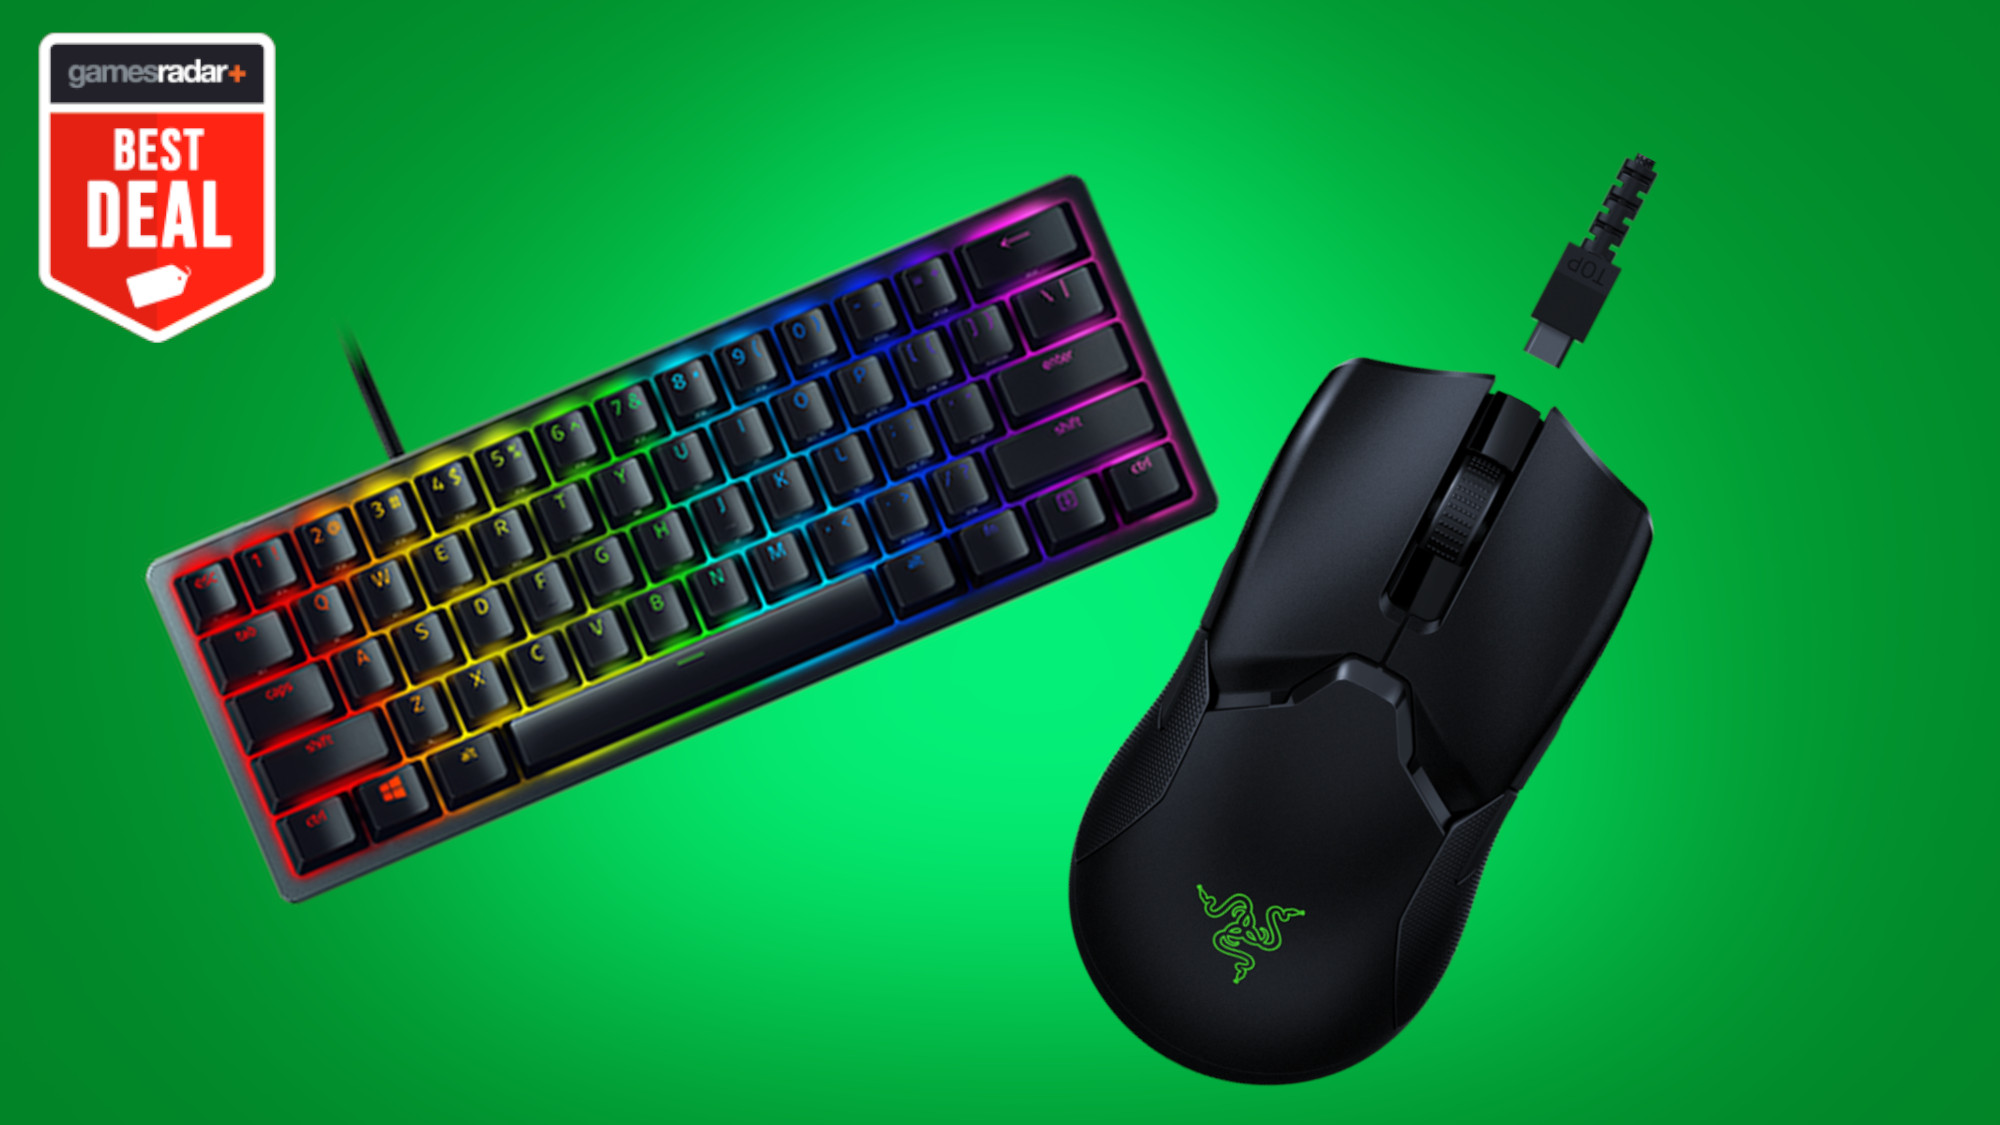 This Razer Huntsman Mini deal sends you home with a free Viper